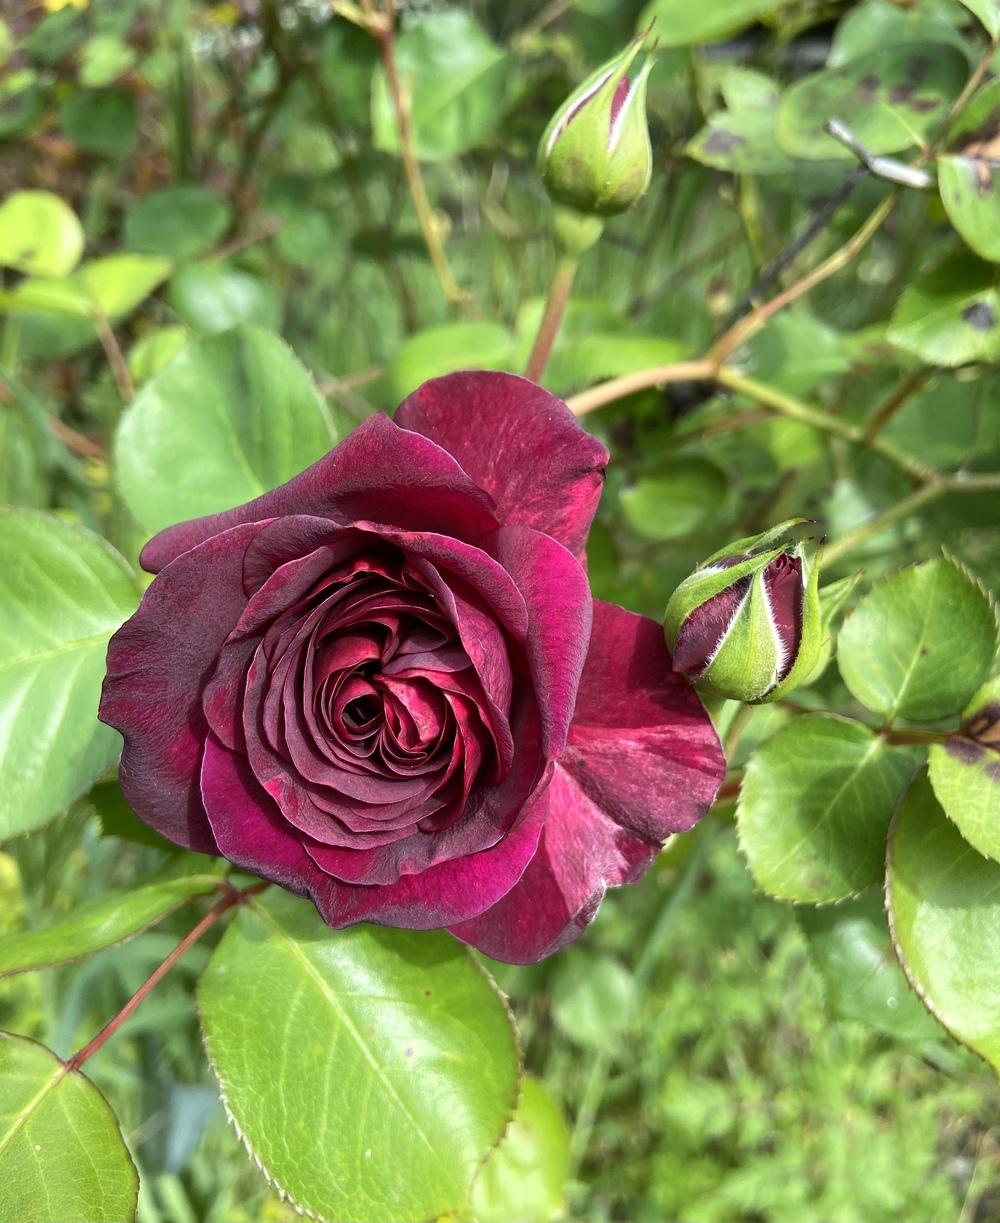 Photo of Rose (Rosa 'Tradescant') uploaded by Calif_Sue